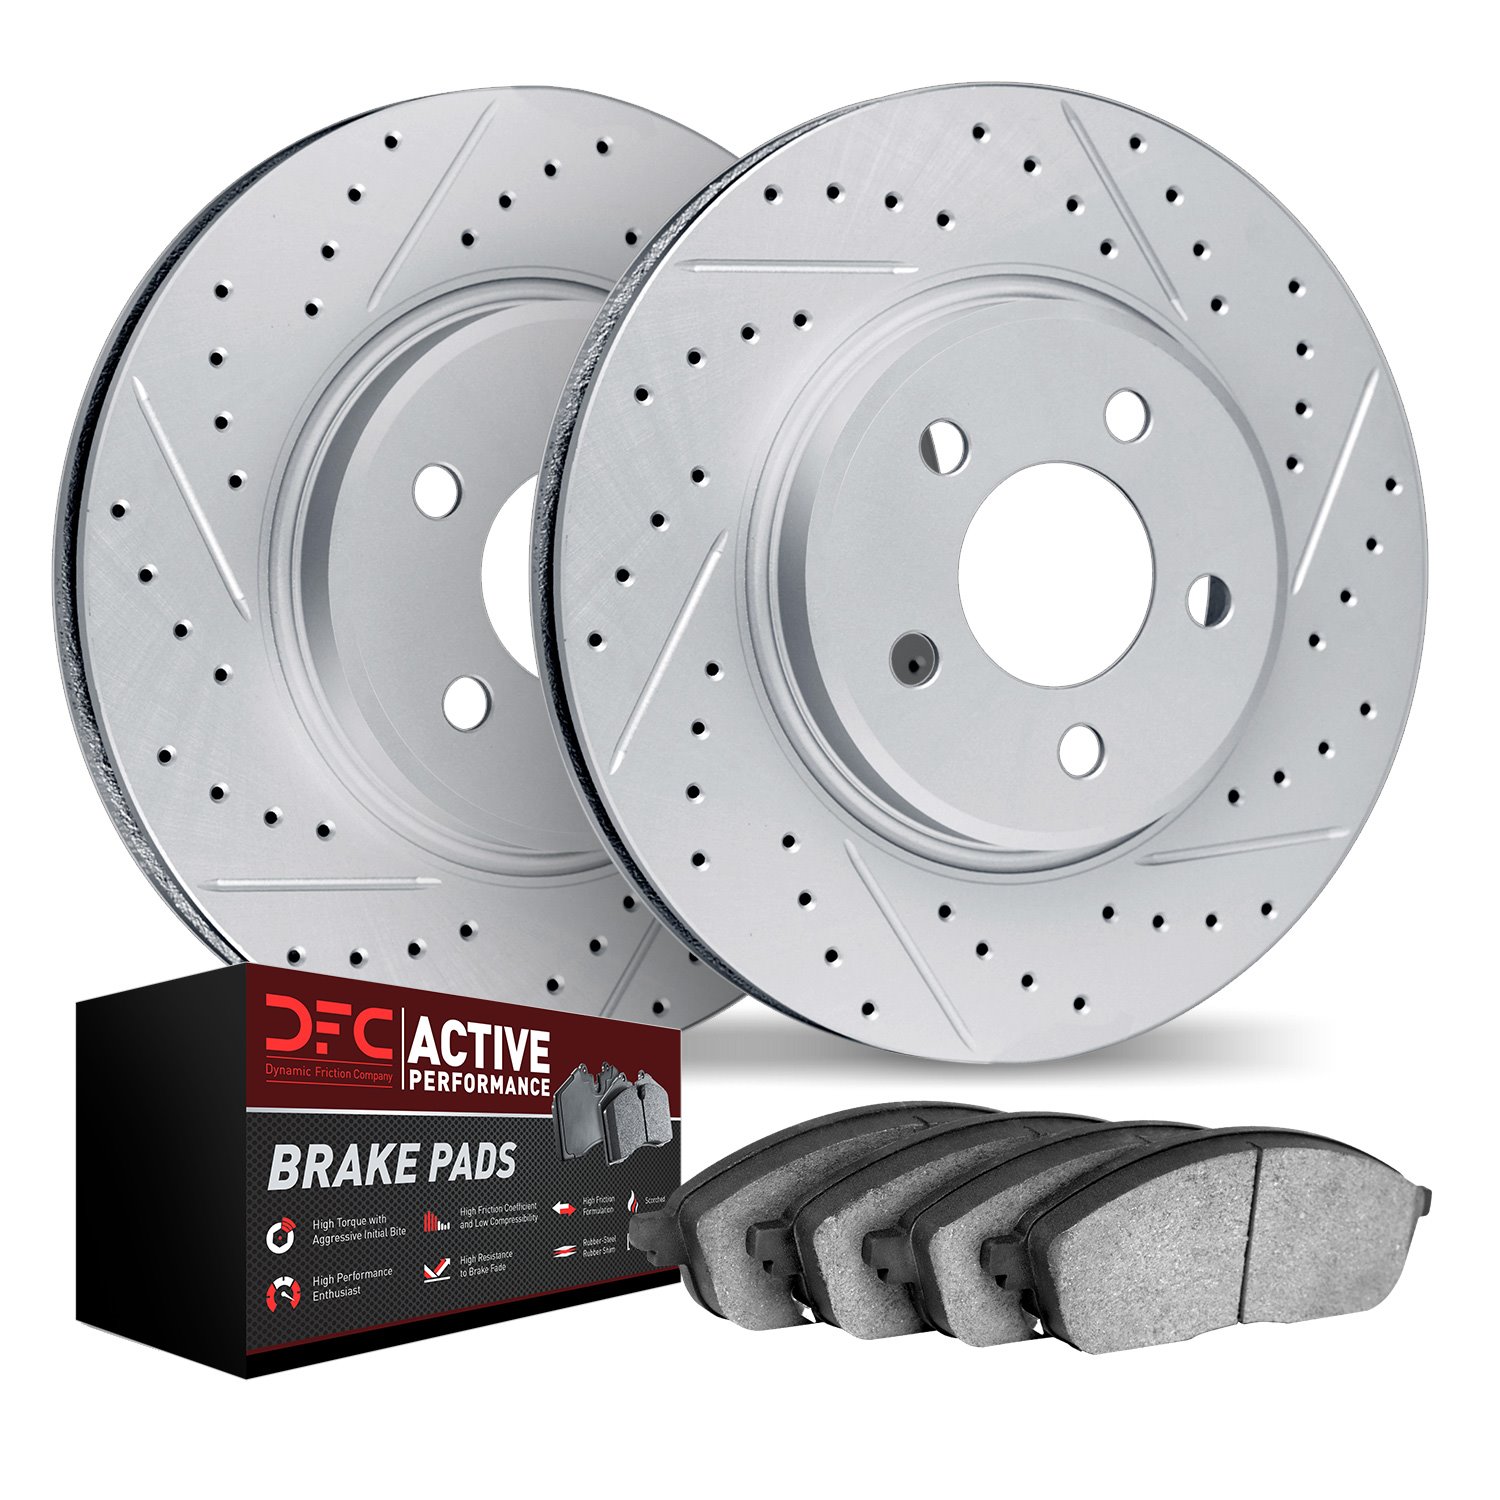 2702-31221 Geoperformance Drilled/Slotted Brake Rotors with Active Performance Pads Kit, Fits Select Multiple Makes/Models, Posi